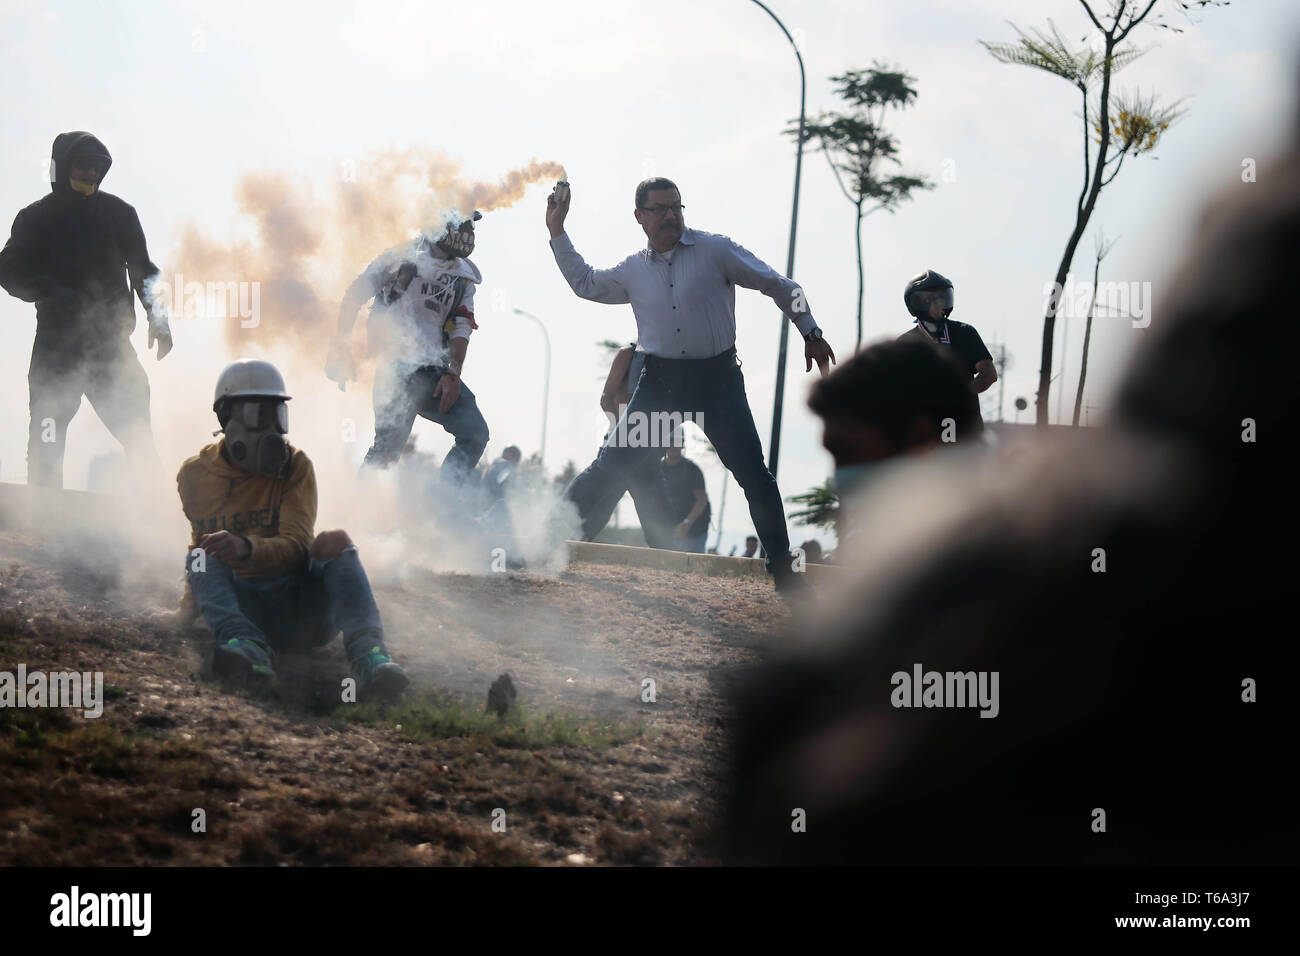 Caracas, Venezuela. 30th Apr, 2019. A man in civilian clothes throws a tear gas grenade around the self-proclaimed interim president Guaido near the air base La Carlota during a mission with soldiers. 'As interim president of Venezuela, as legitimate supreme commander of the armed forces, I call on all soldiers to join us,' says the opposition leader on a highway. Credit: Rafael Hernandez/dpa/Alamy Live News Stock Photo